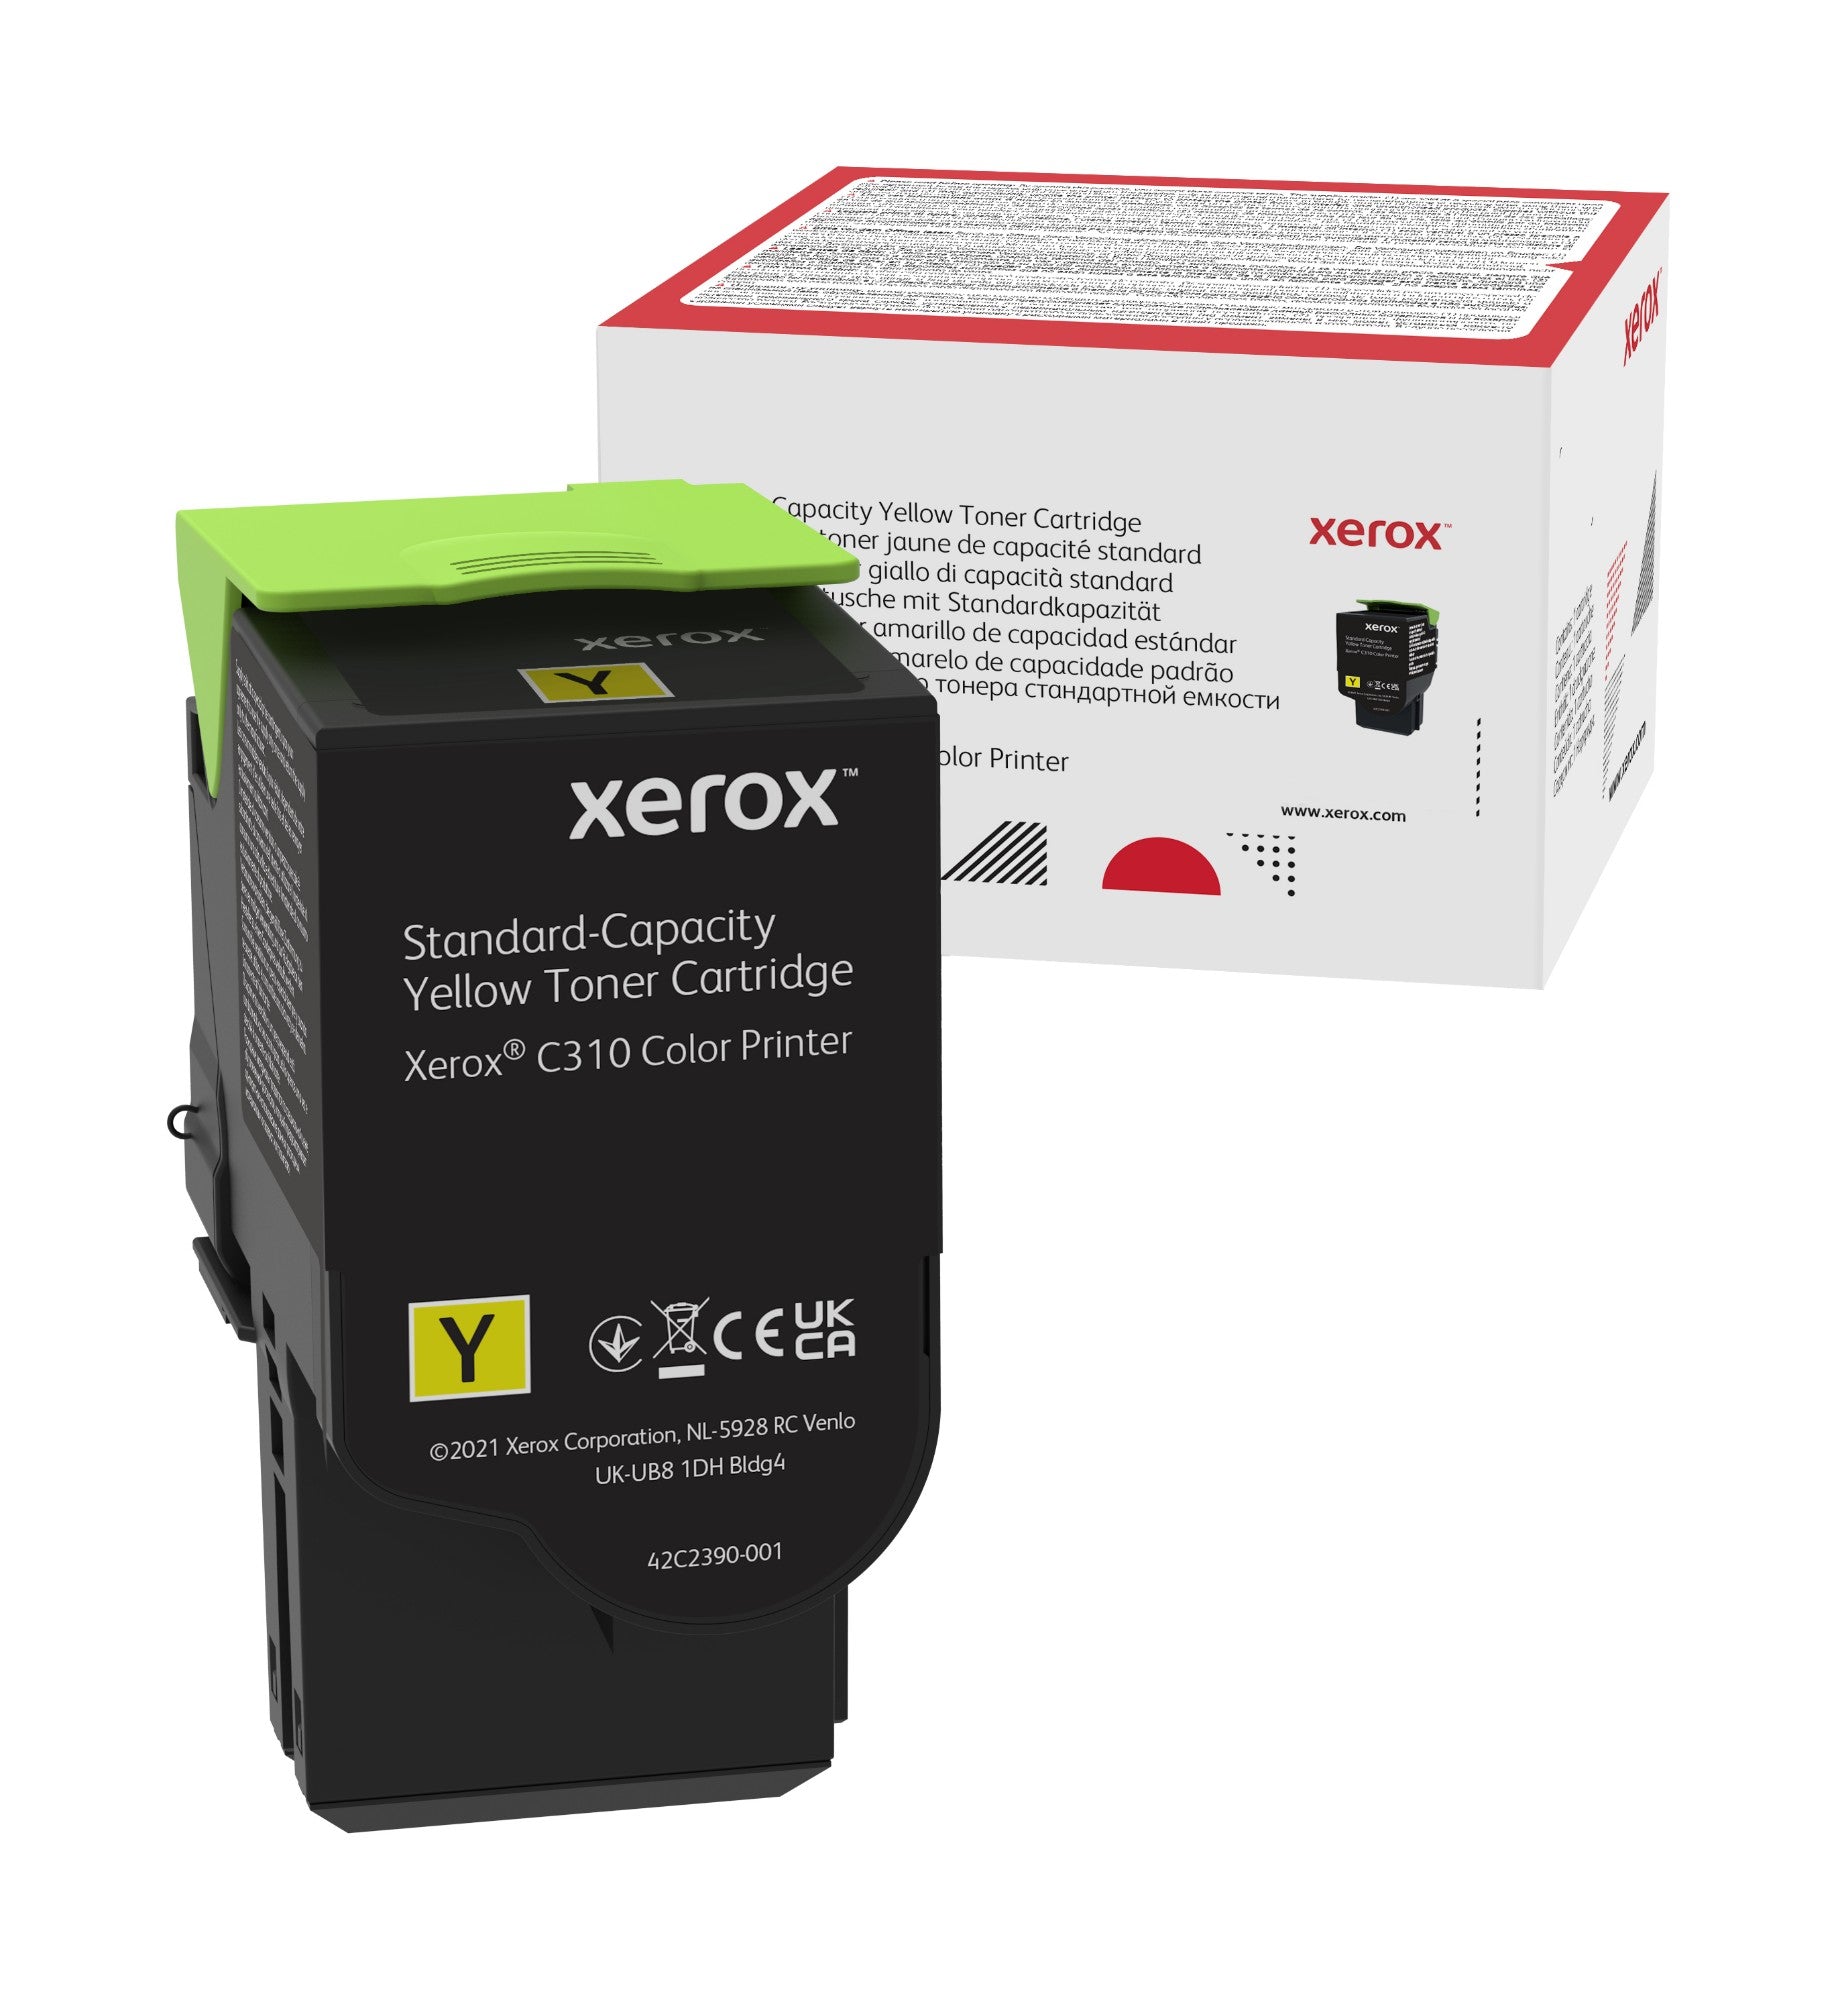 Xerox 006R04359 Toner-kit yellow, 2K pages ISO/IEC 19752 for Xerox C 310